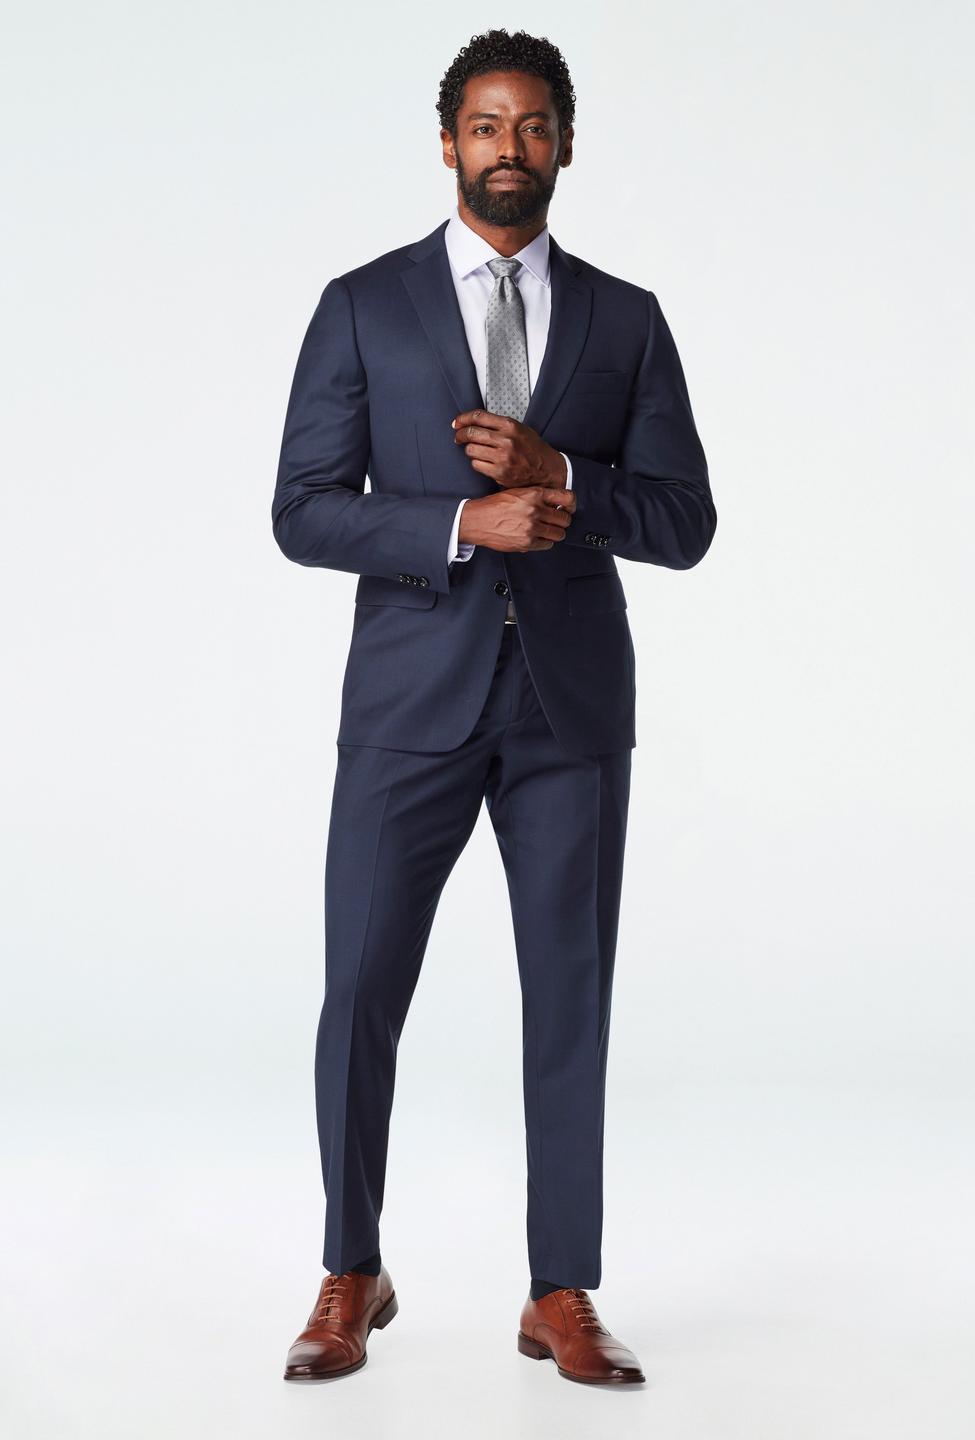 Blue suit - Highbridge Solid Design from Luxury Indochino Collection